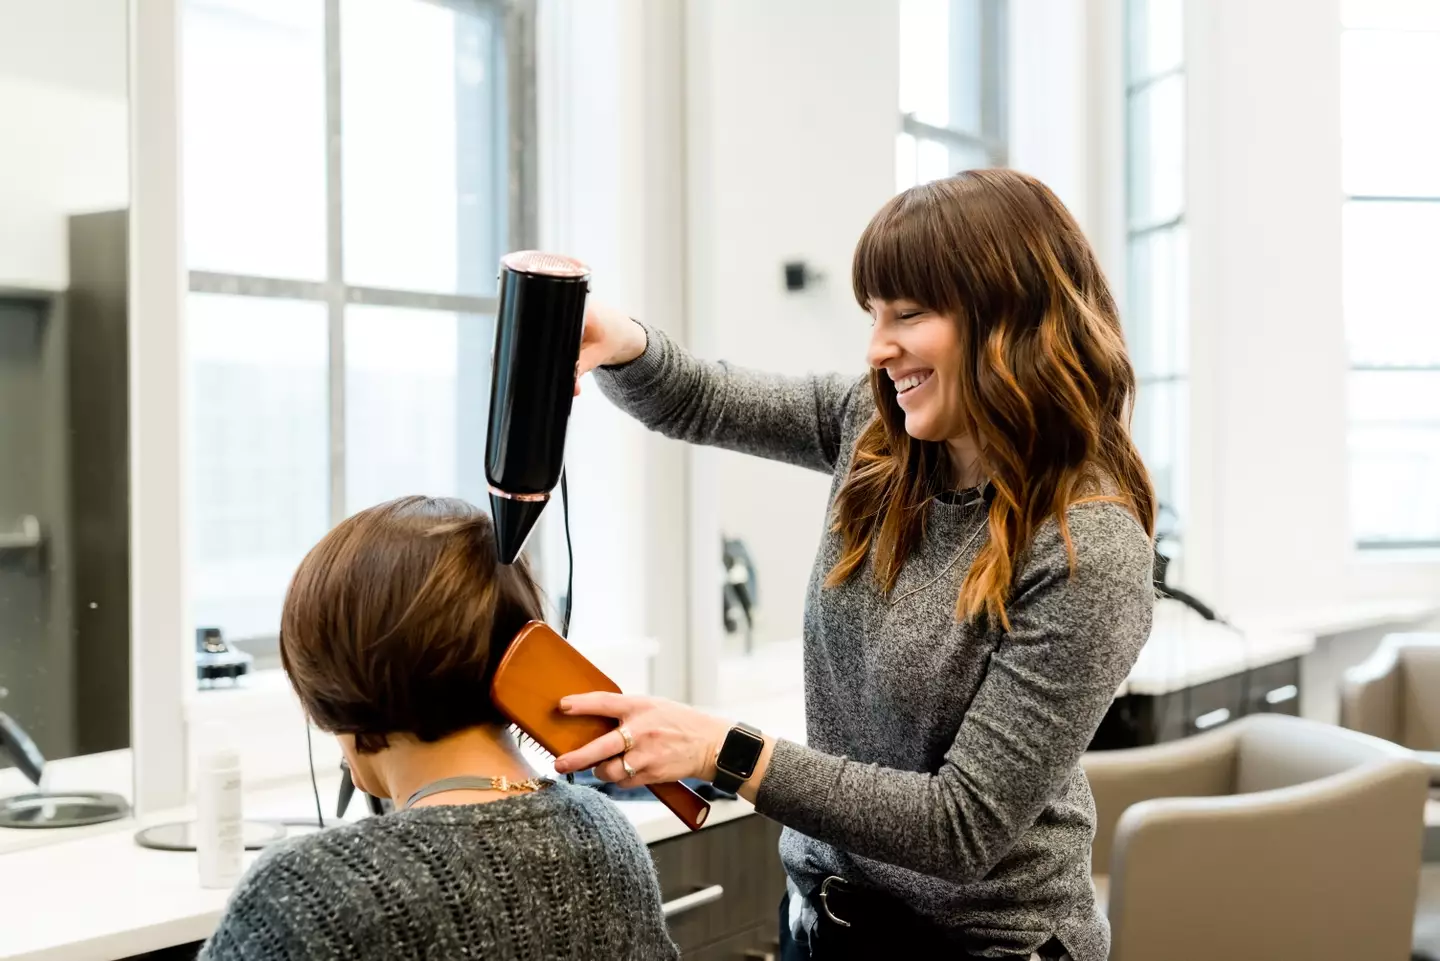 Here's everything you shouldn't do at the hair salon.